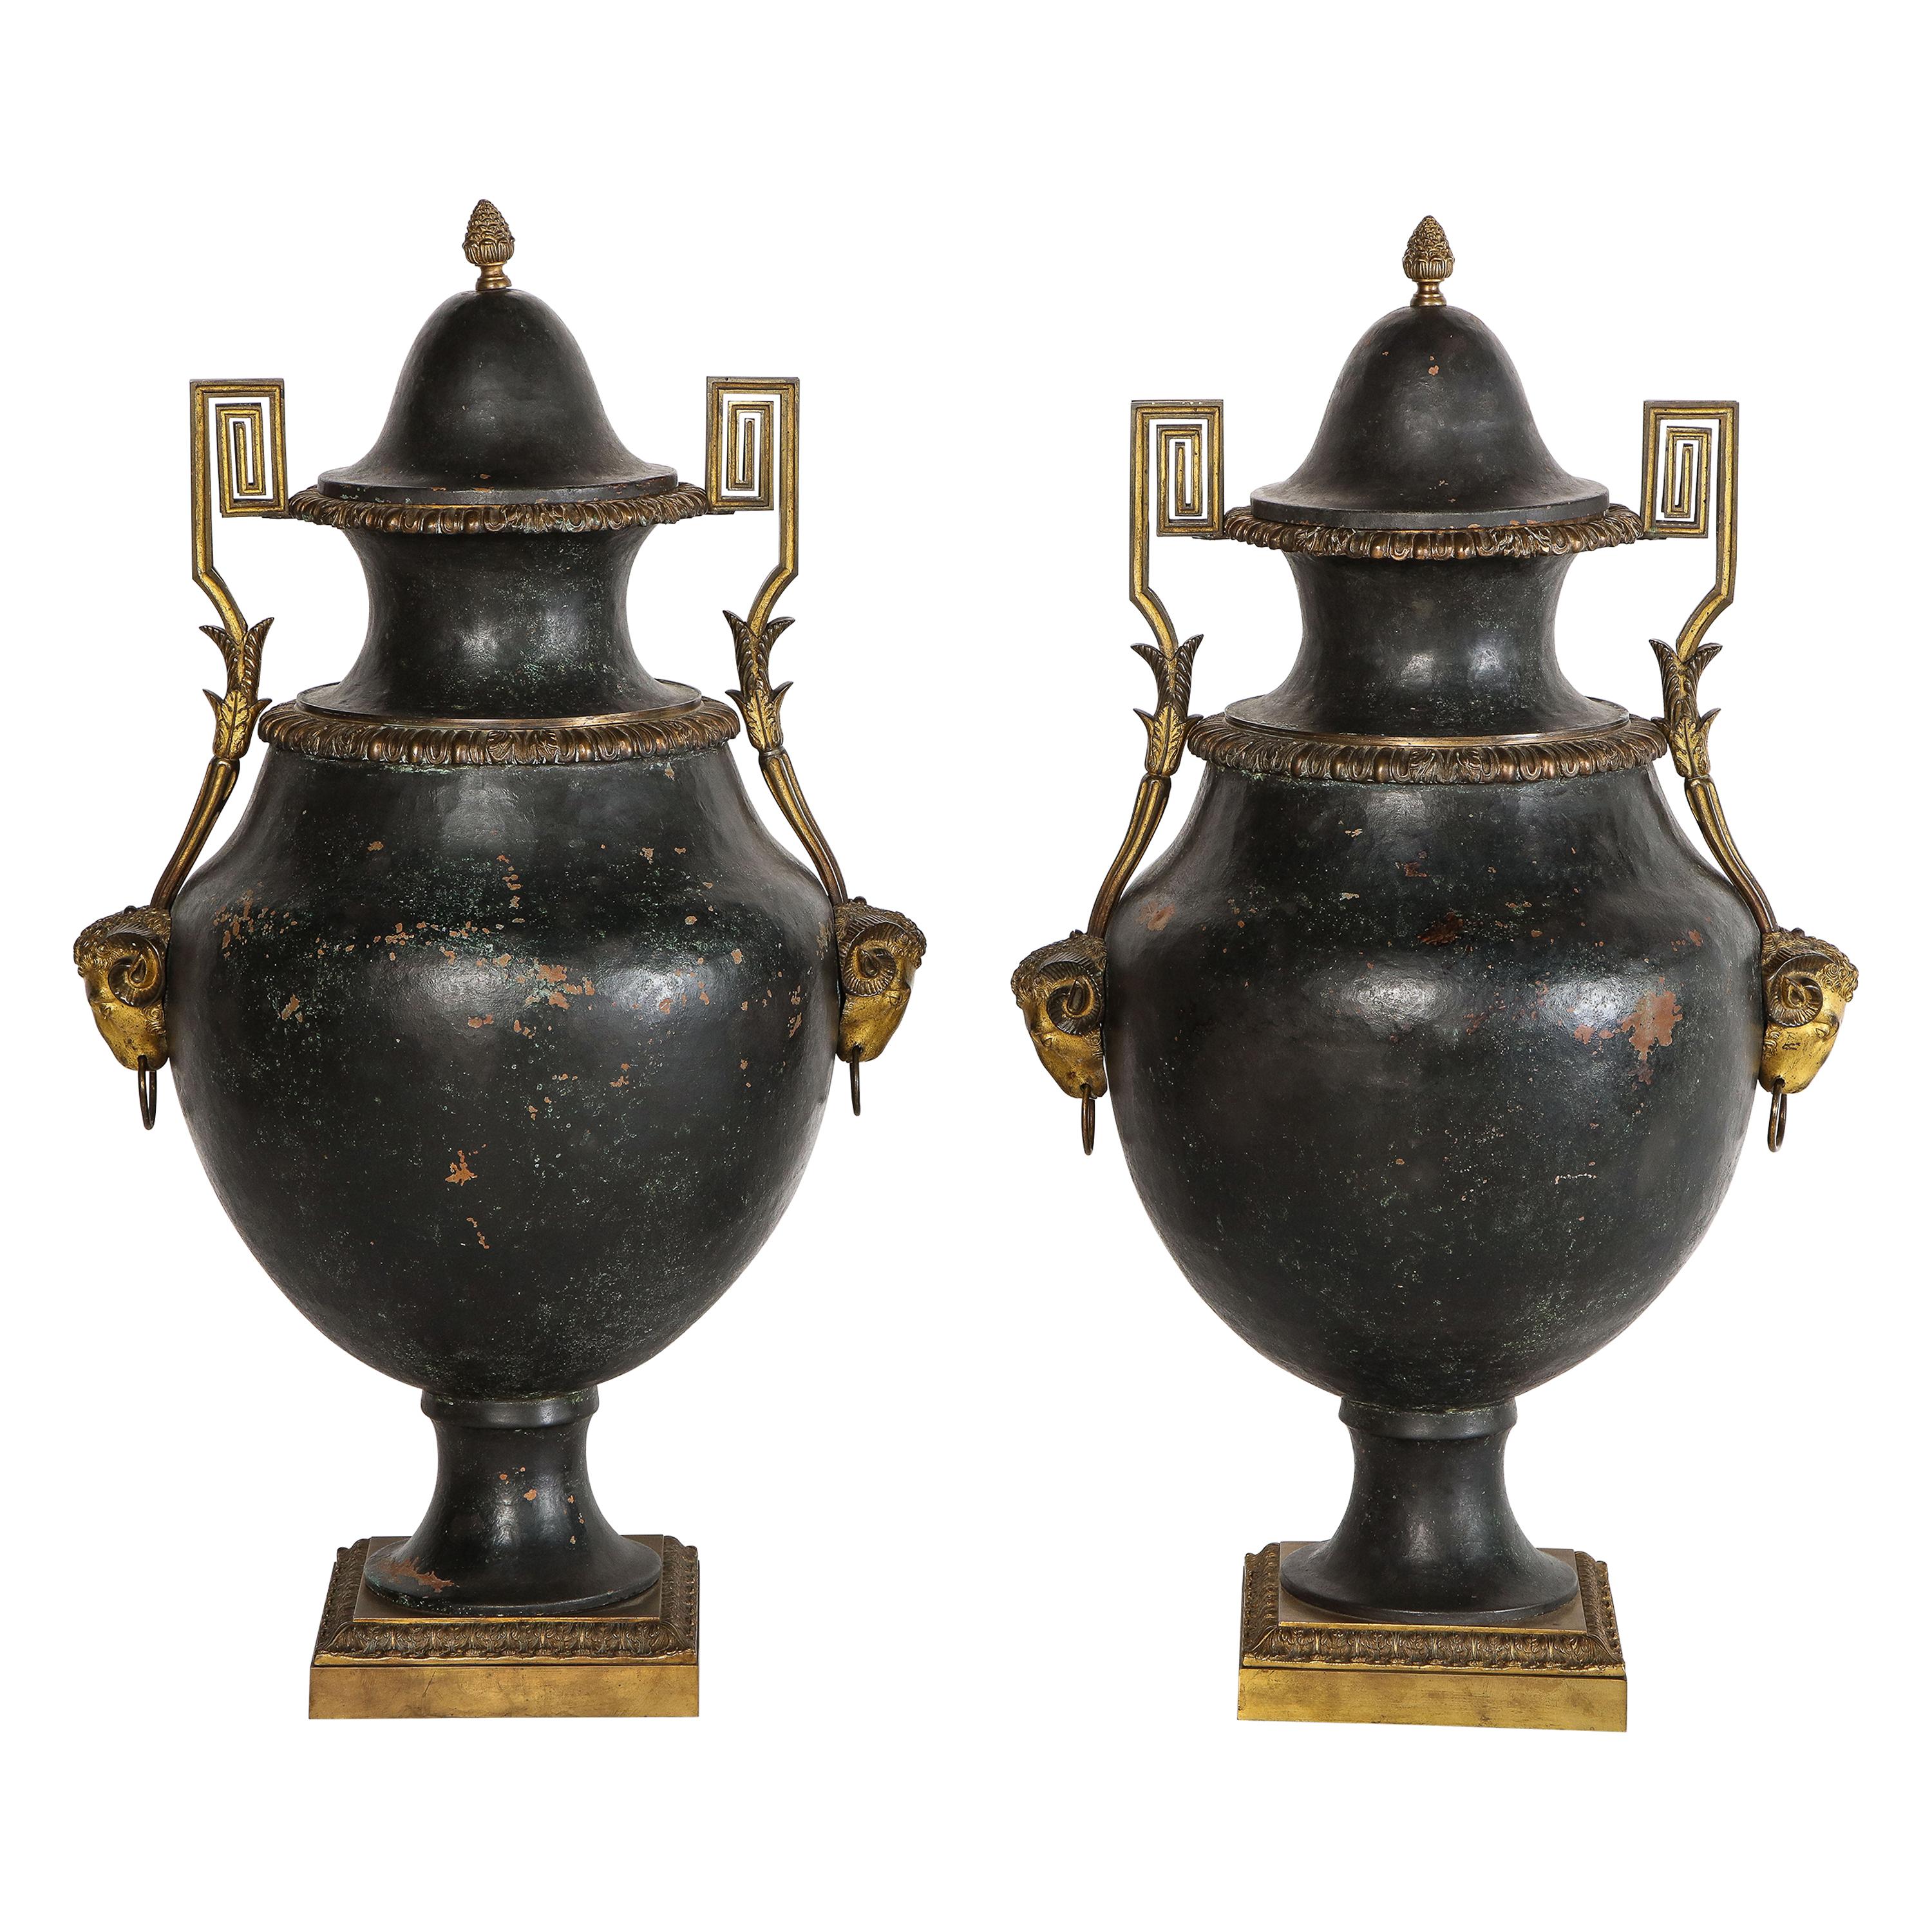 Pair of Painted Tole and Dore Bronze Mounted Neoclassical Style Covered Vases